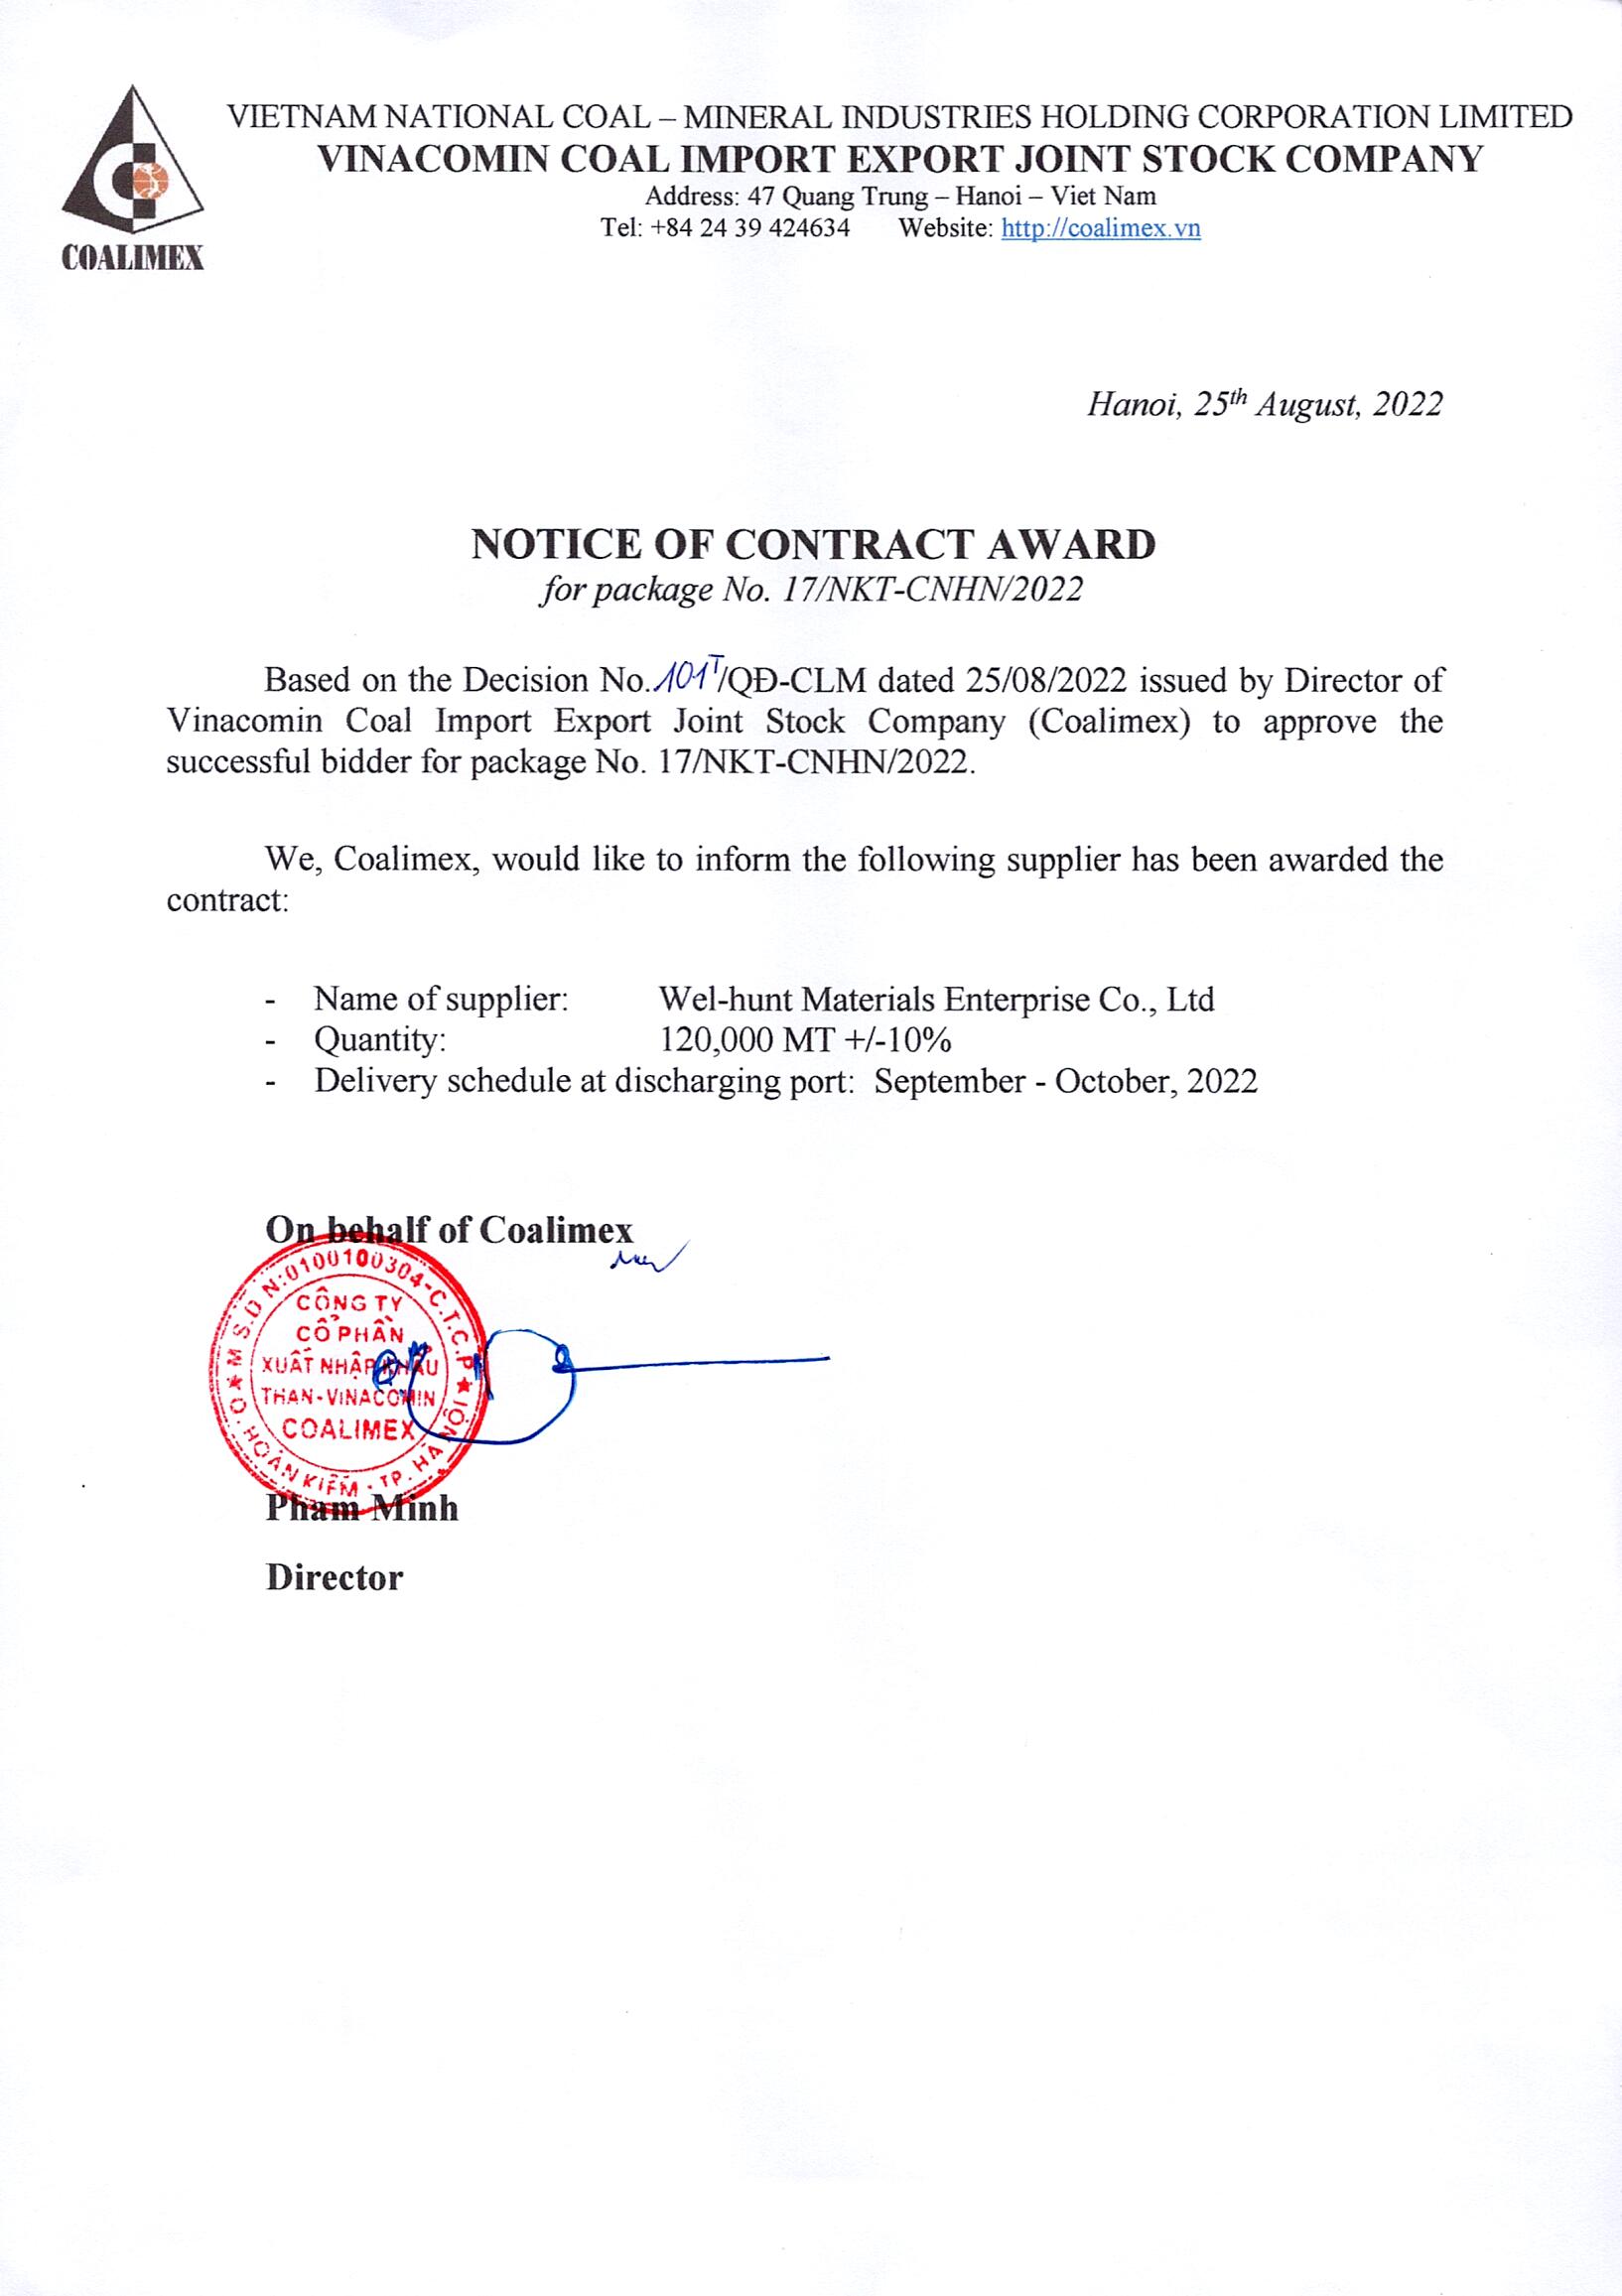 NOTICE OF CONTRACT AWARD FOR PACKAGE No.17/NKT-CNHN/2022